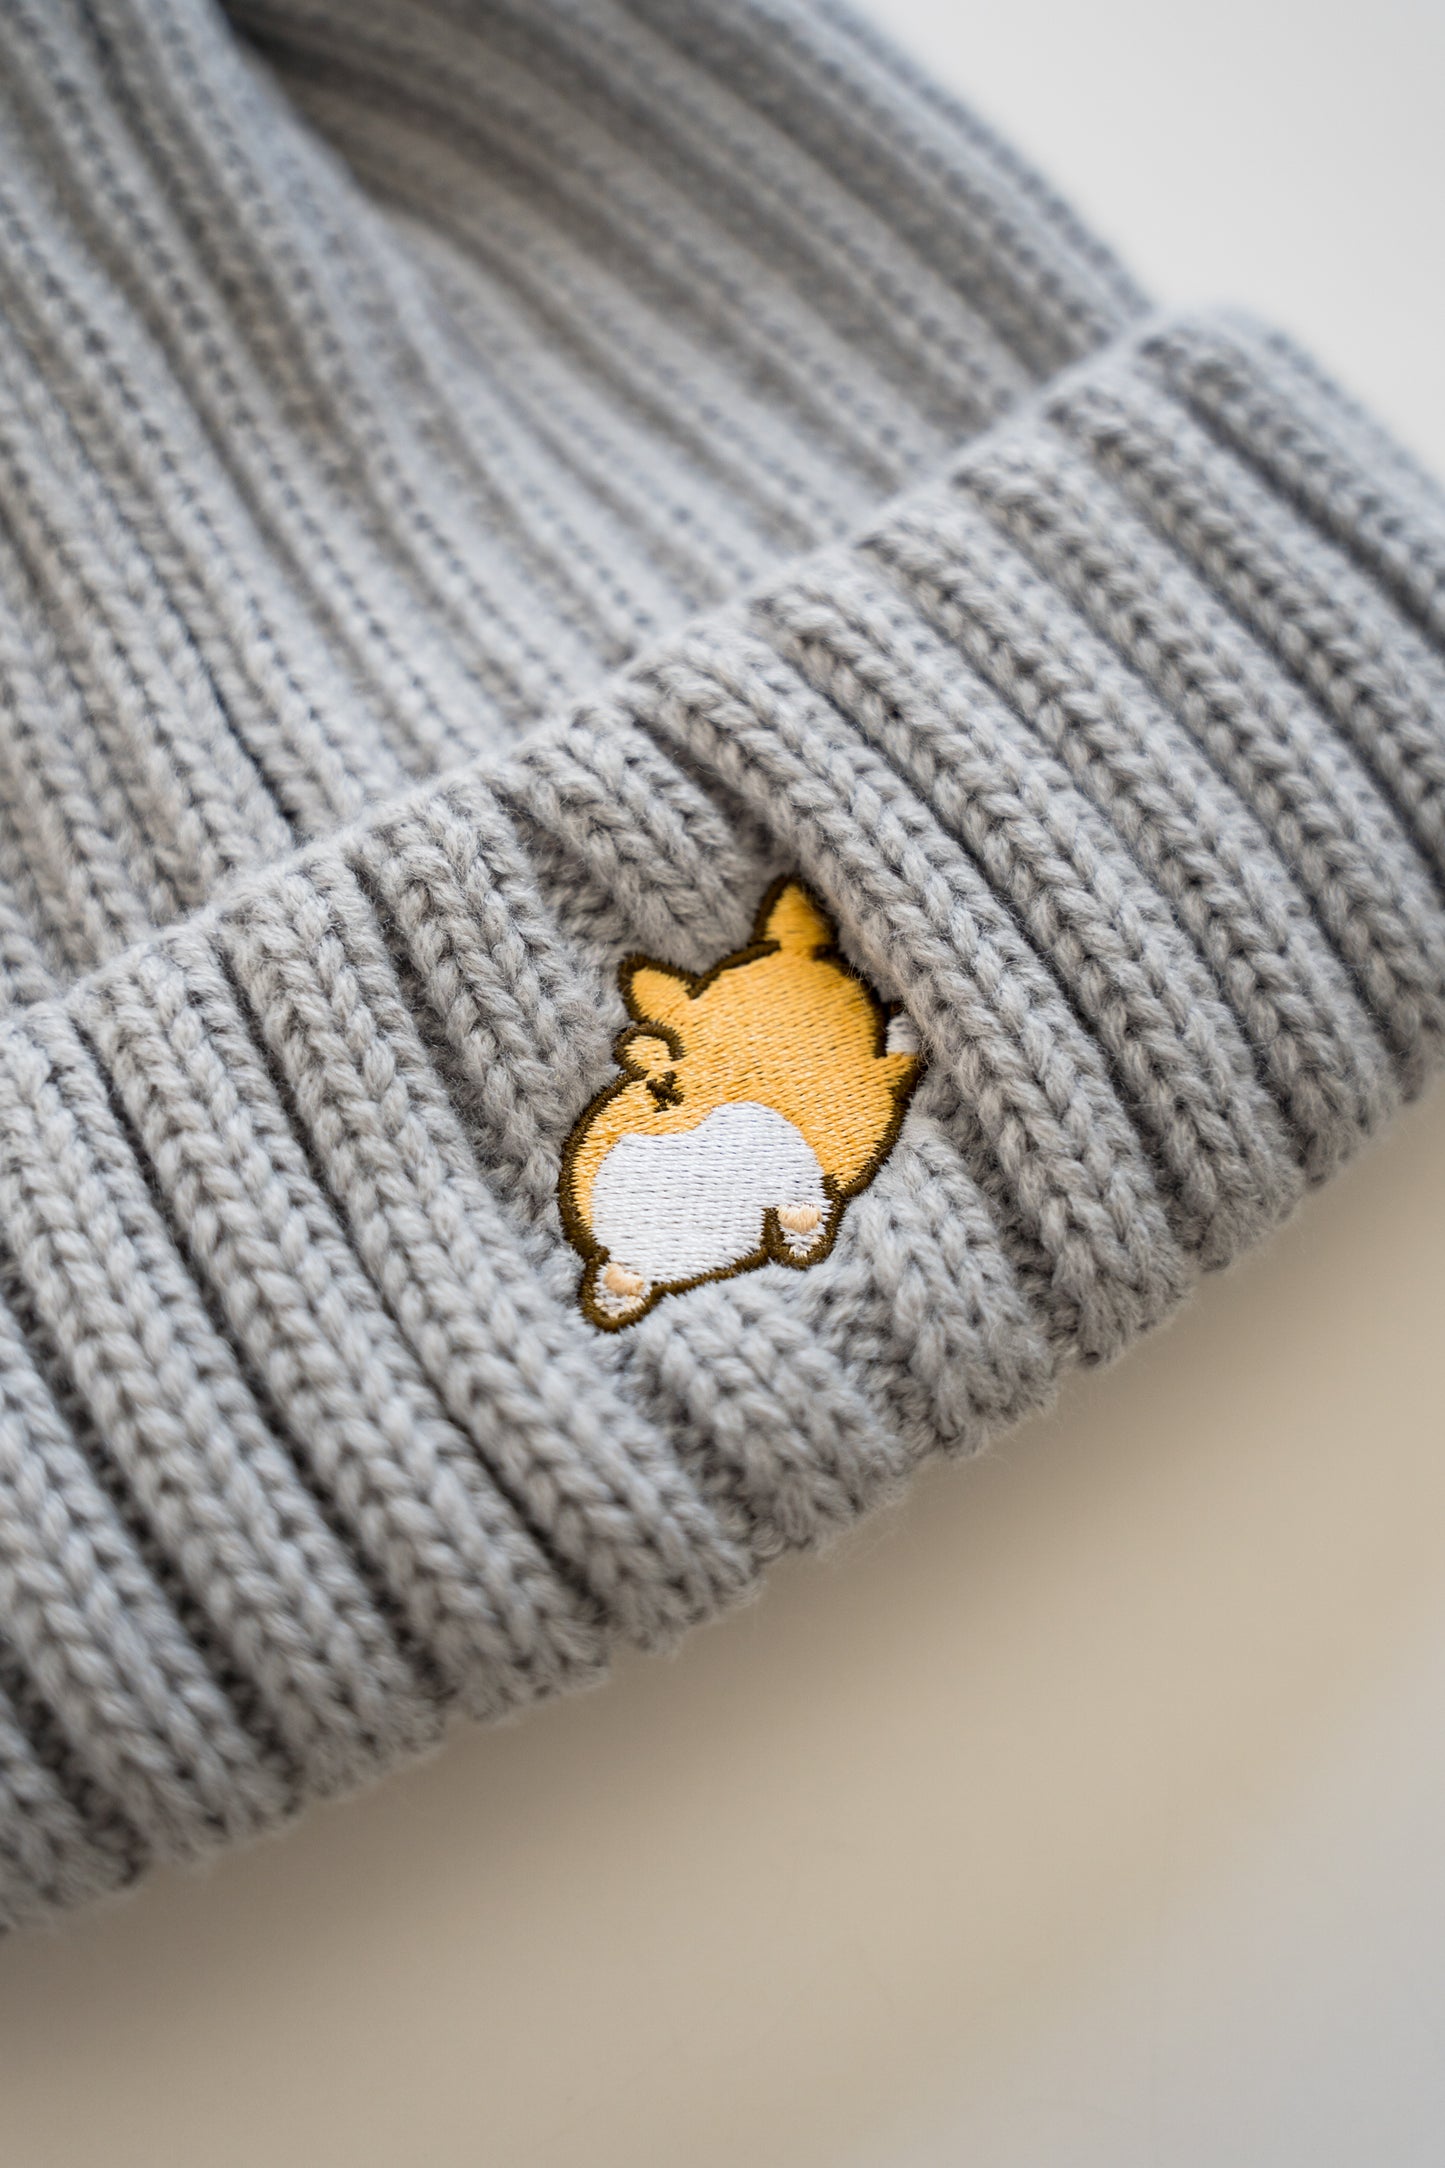 Embroidered Corgi Sploot Ribbed Knit Acrylic Wool Beanie Hat